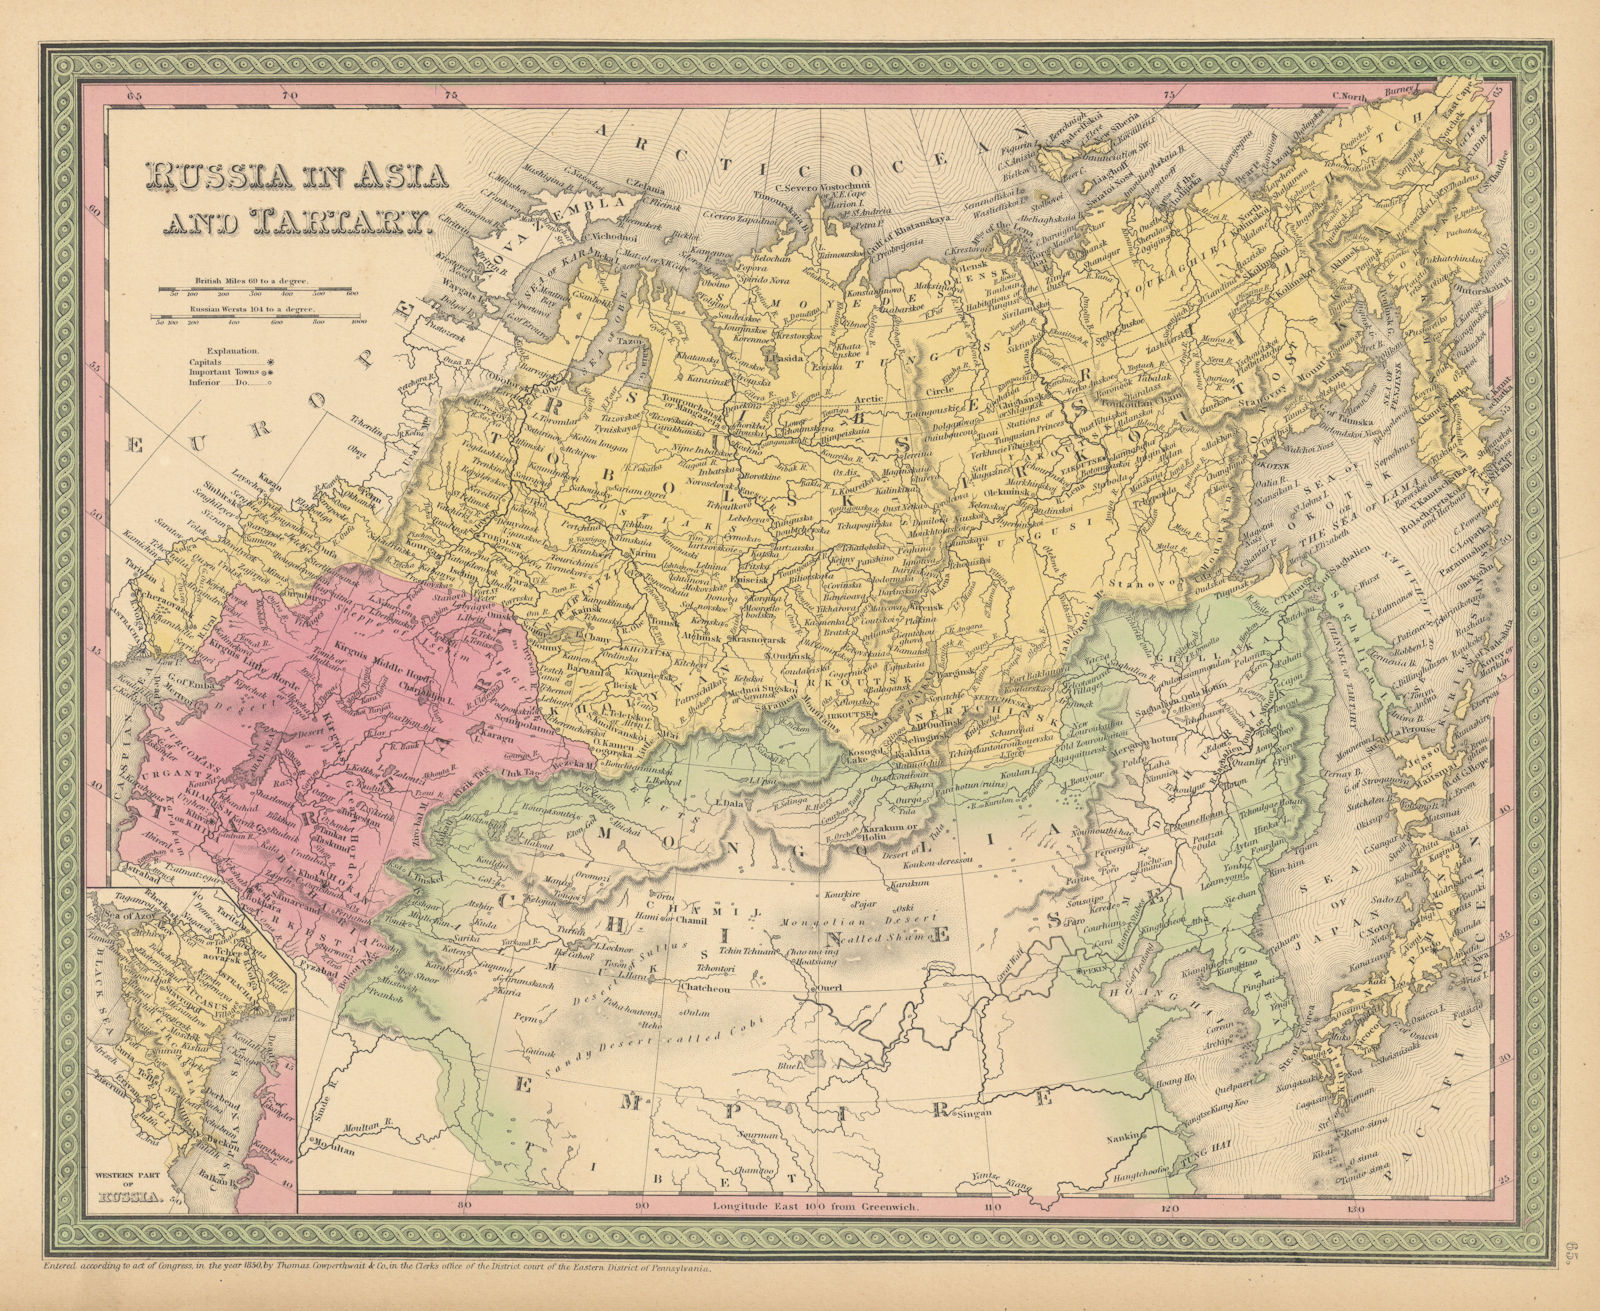 Associate Product Russia in Asia and Tartary. Central Asia Siberia. THOMAS, COWPERTHWAIT 1852 map